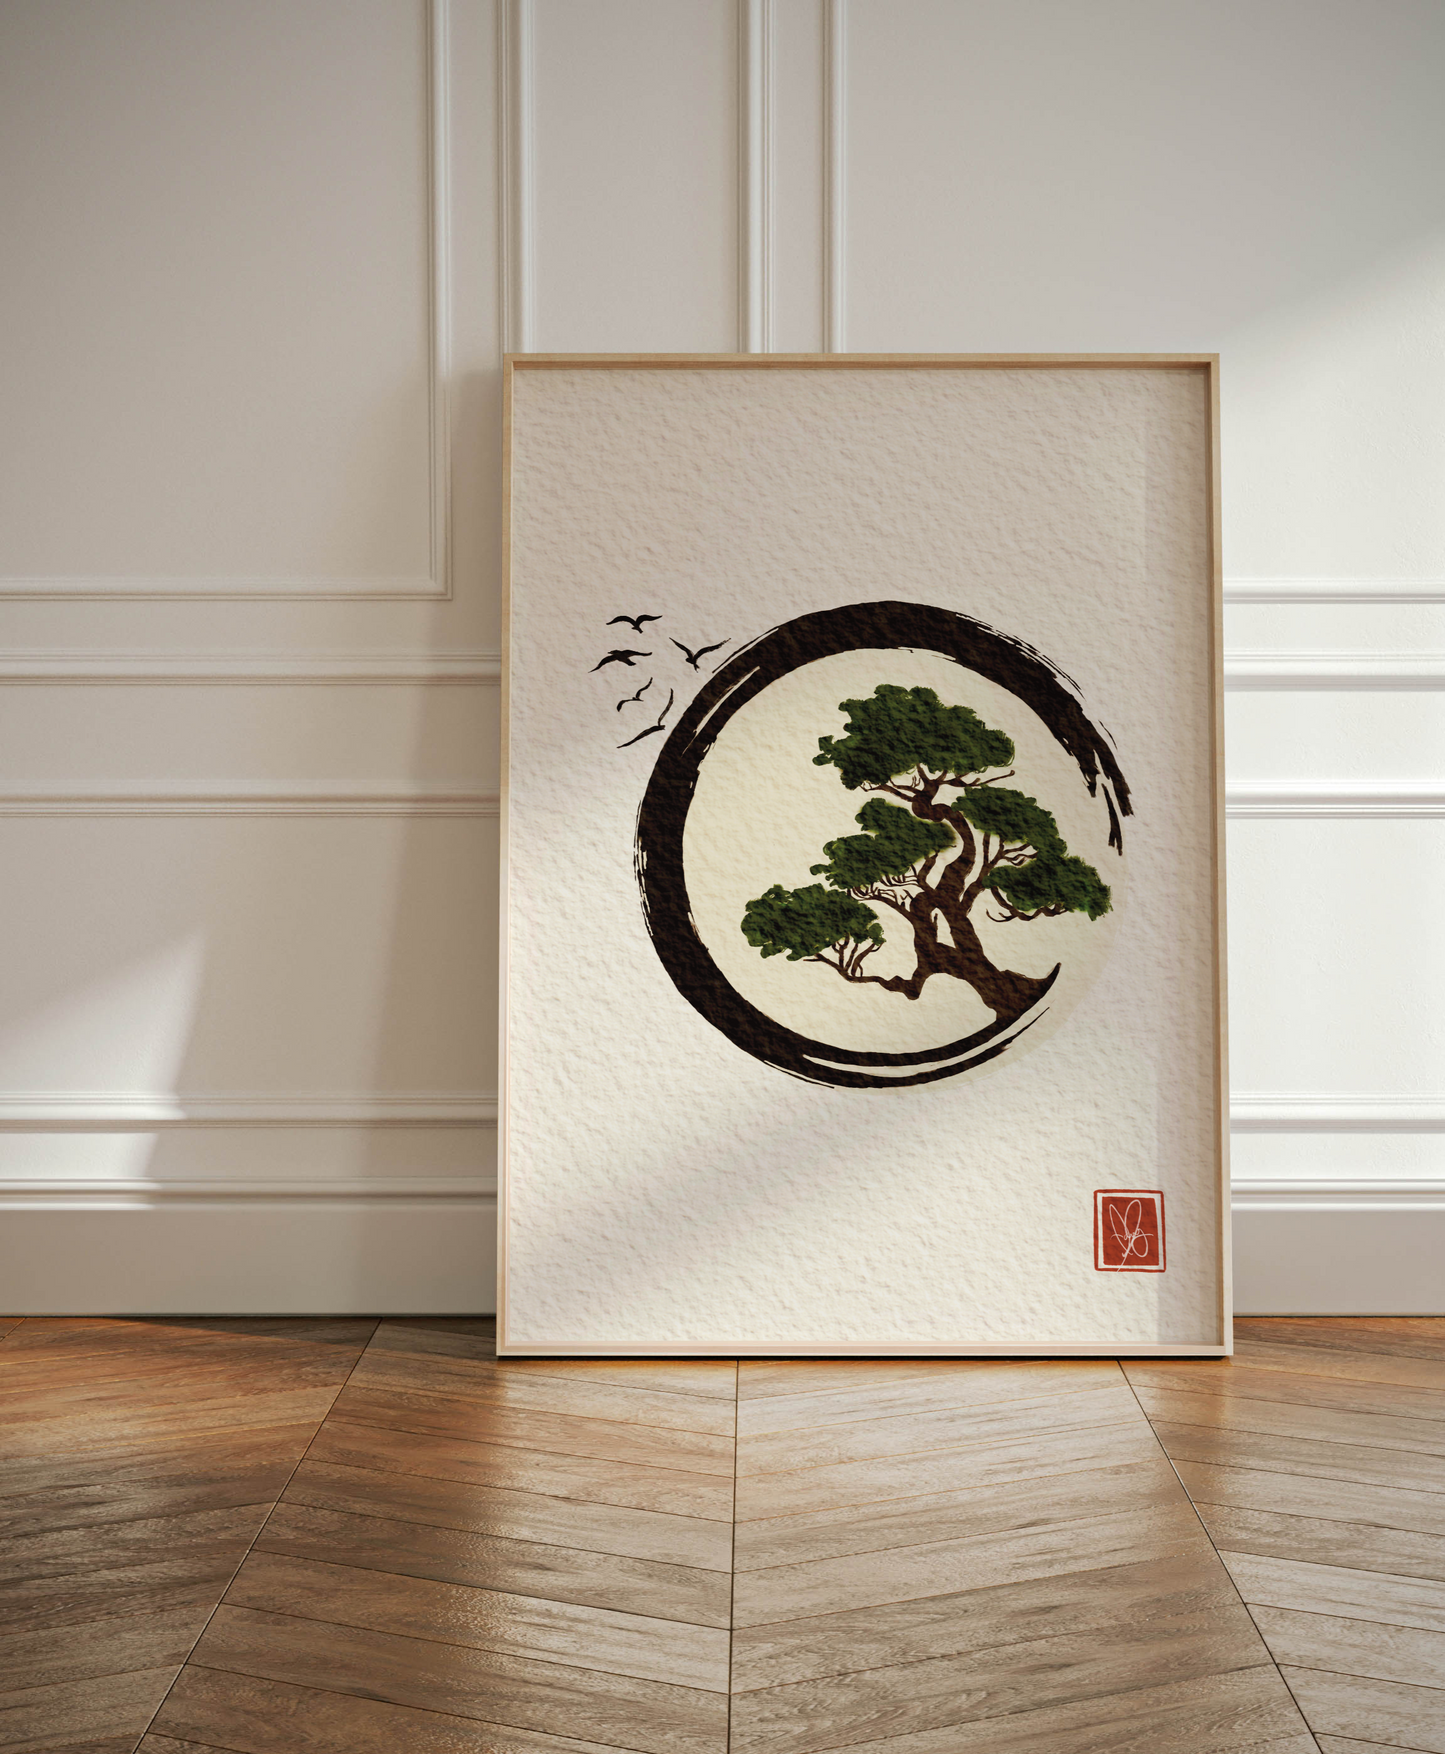 Japandi-Inspired Bonsai Tree Digital Art Print by Unwrapped Collections. A serene depiction of a bonsai tree in minimalist style, perfect for adding tranquility to your home decor. Shop now for high-quality botanical prints.